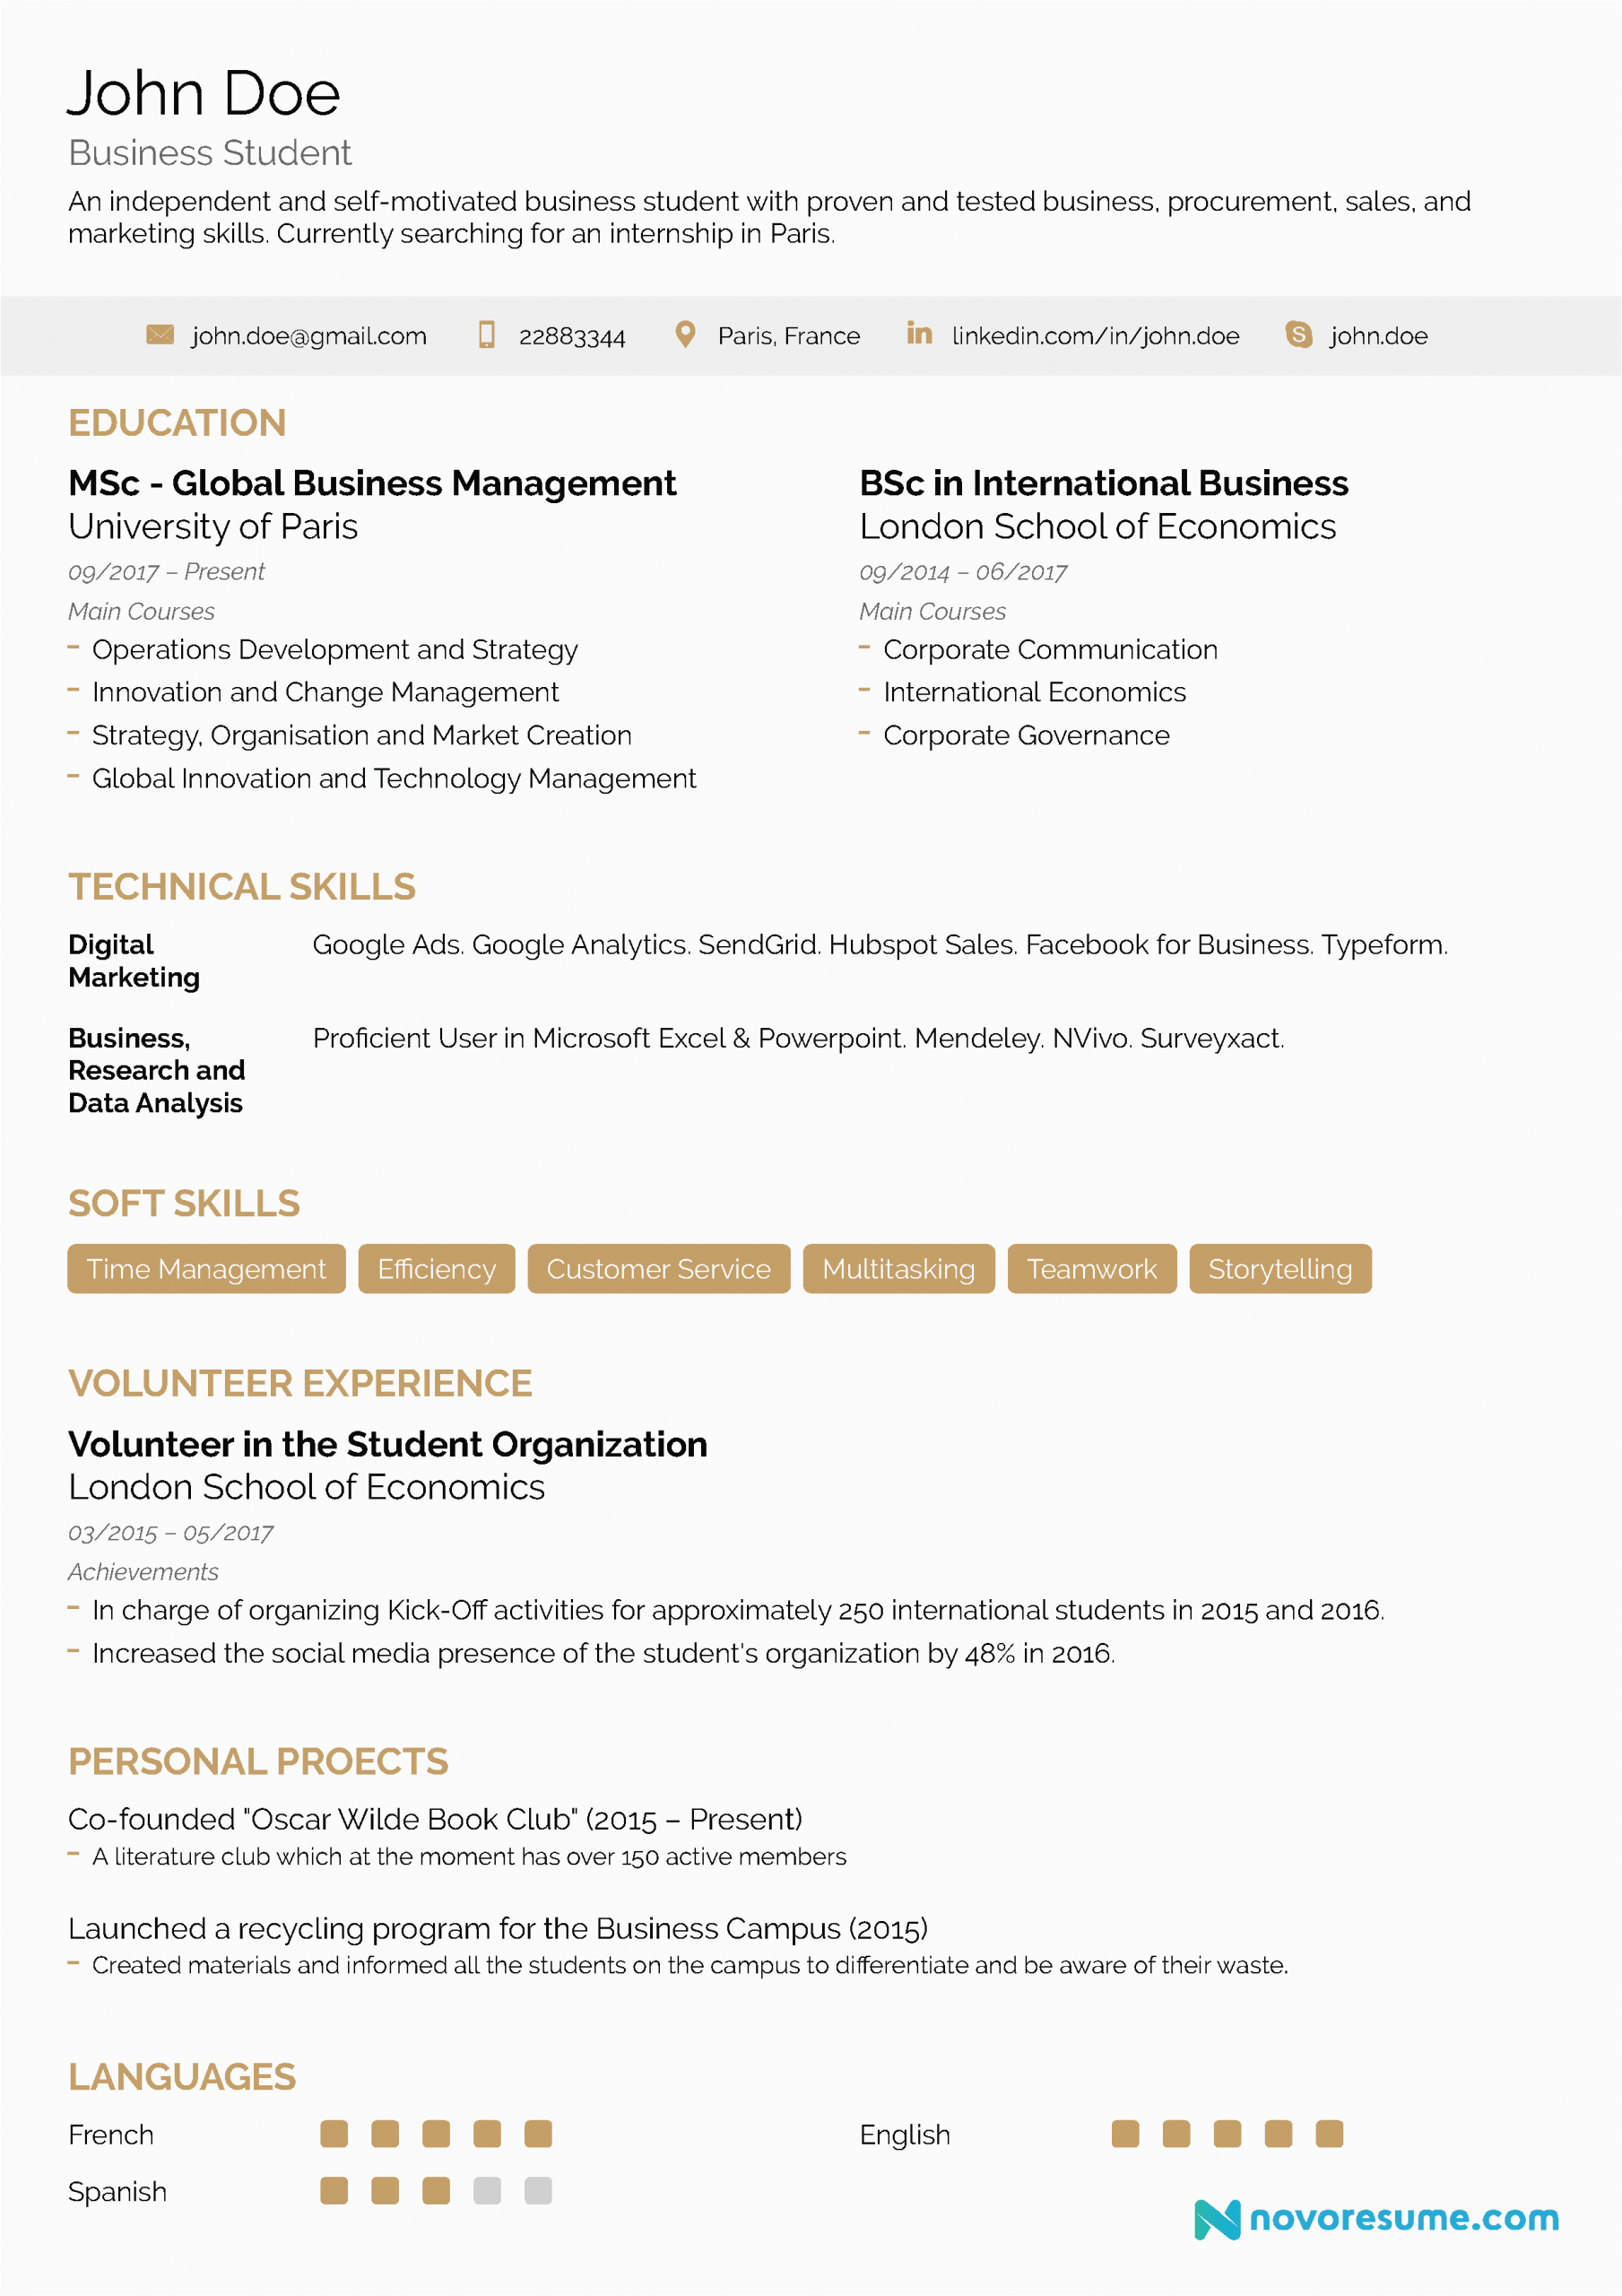 Resume Template if You Have No Experience Cv Experience Examples Database Letter Templates